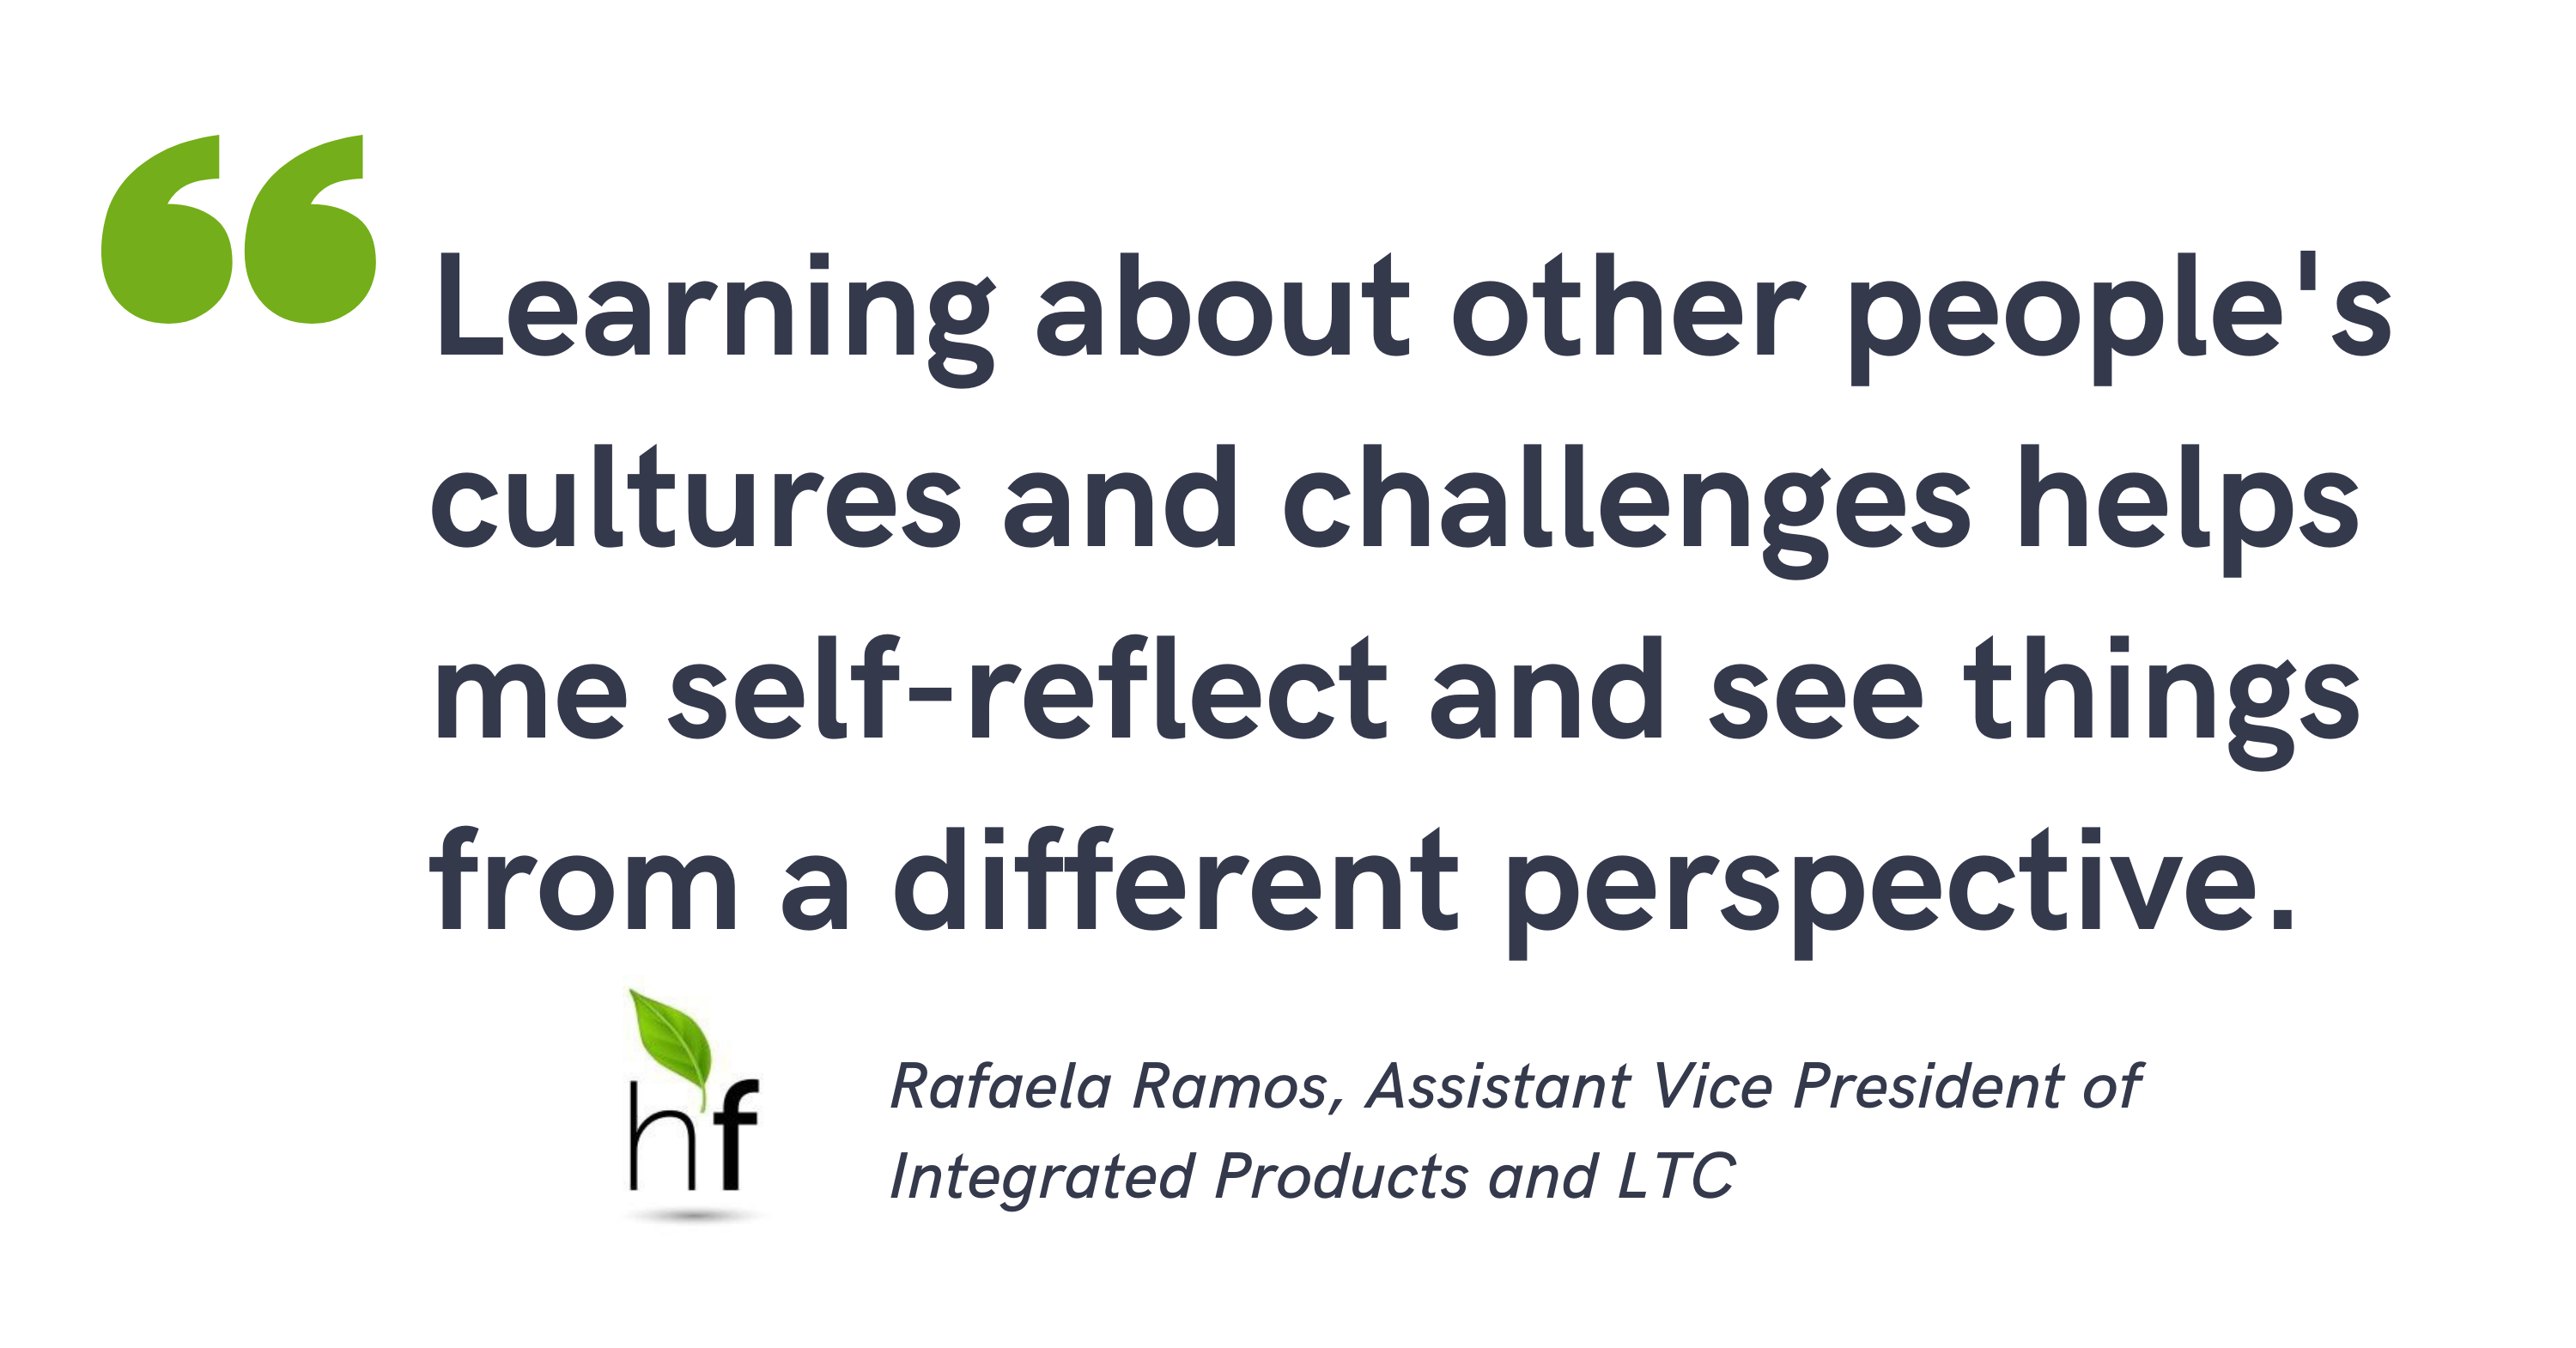 From Marketing Rep to Assistant Vice President: How Rafaela Ramos Grew Her Career at Healthfirst